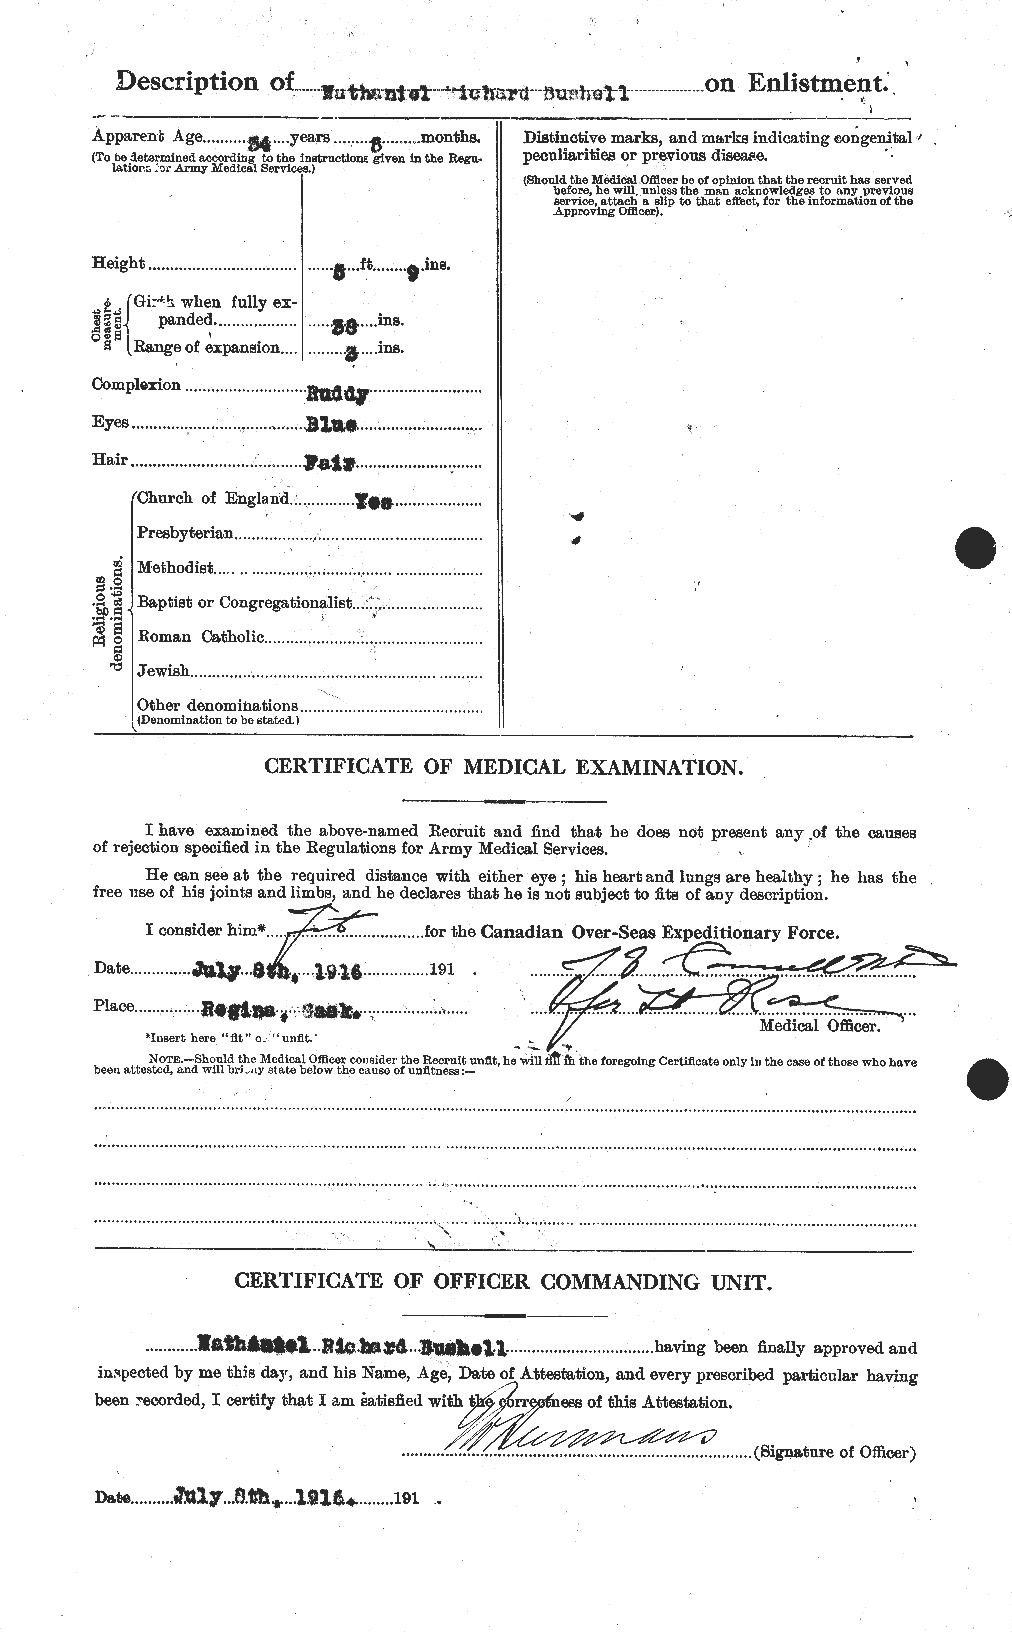 Personnel Records of the First World War - CEF 274480b